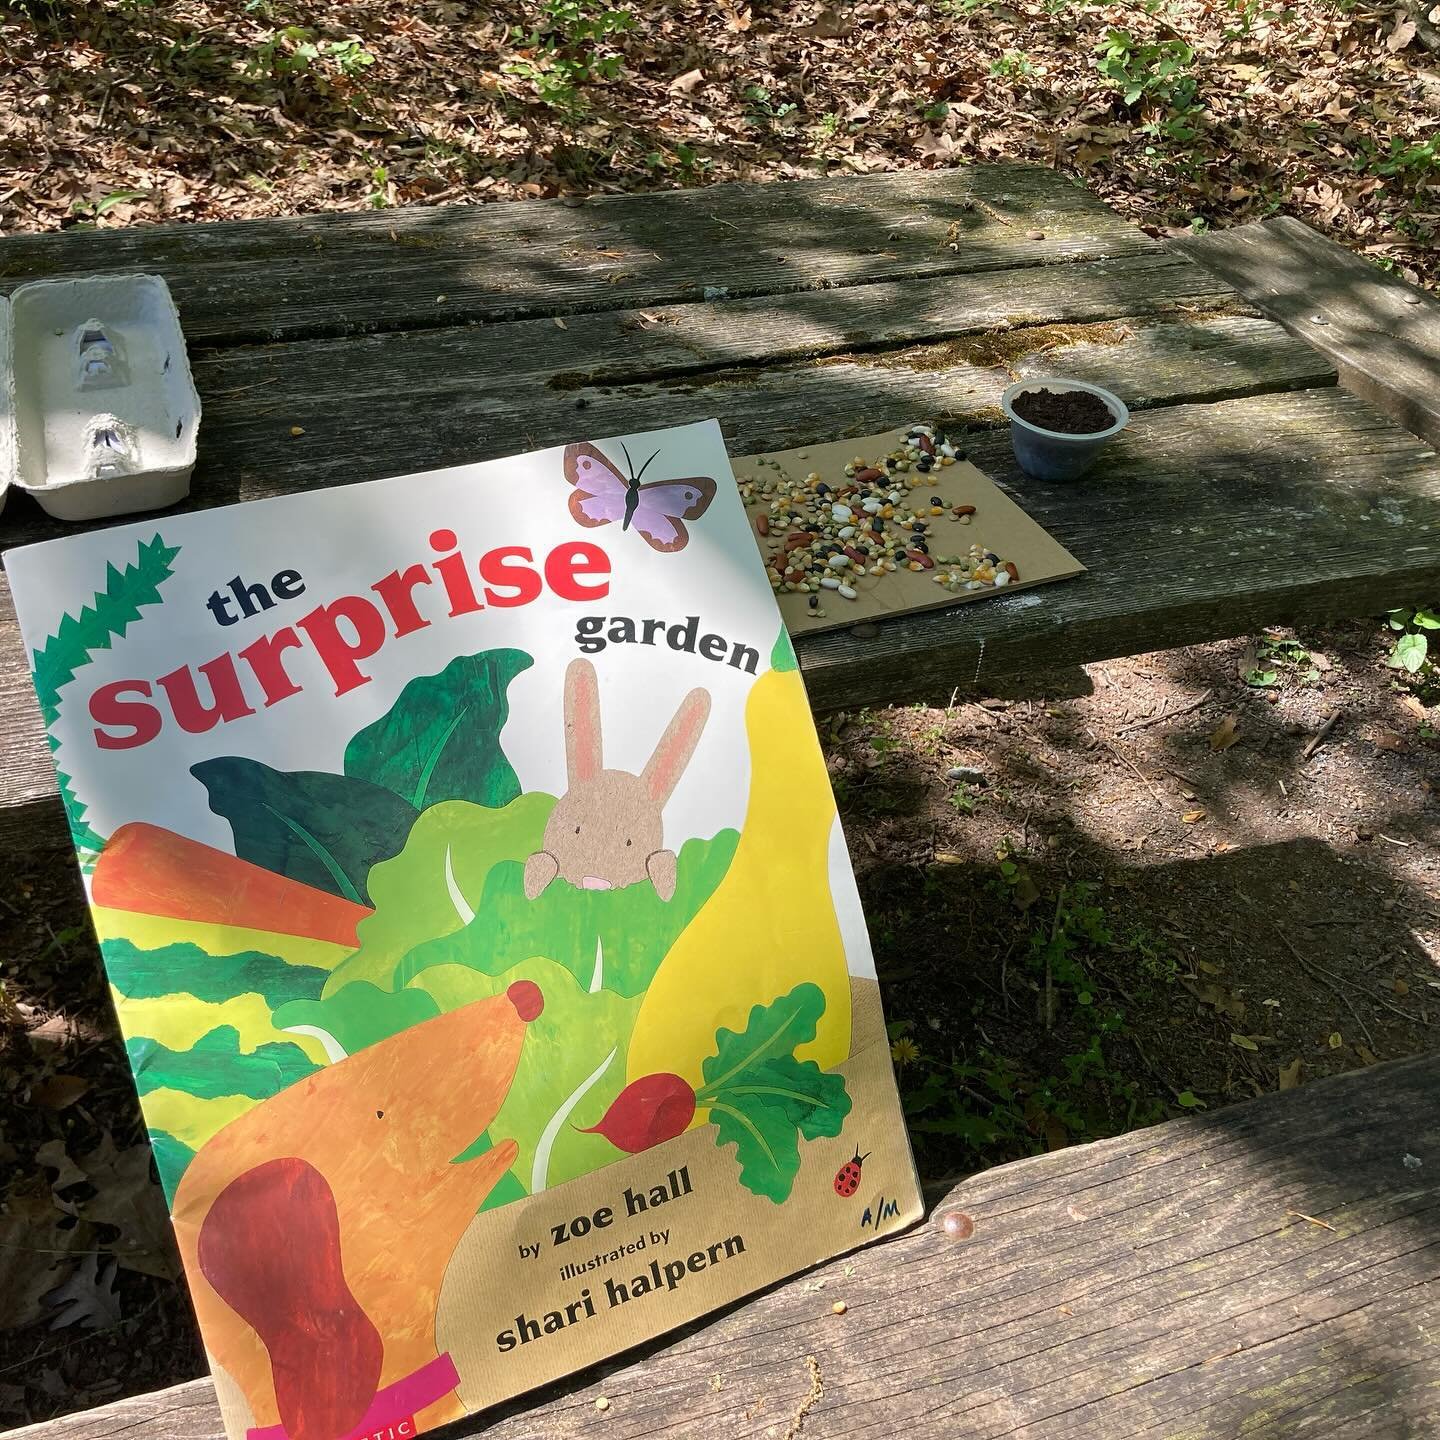 Our last Thursday Explore Together class felt more like summer than spring! We talked about how important plants and trees are to the earth, read The Surprise Garden, and then planted some seeds and made some seed art! The shade and water at the natu